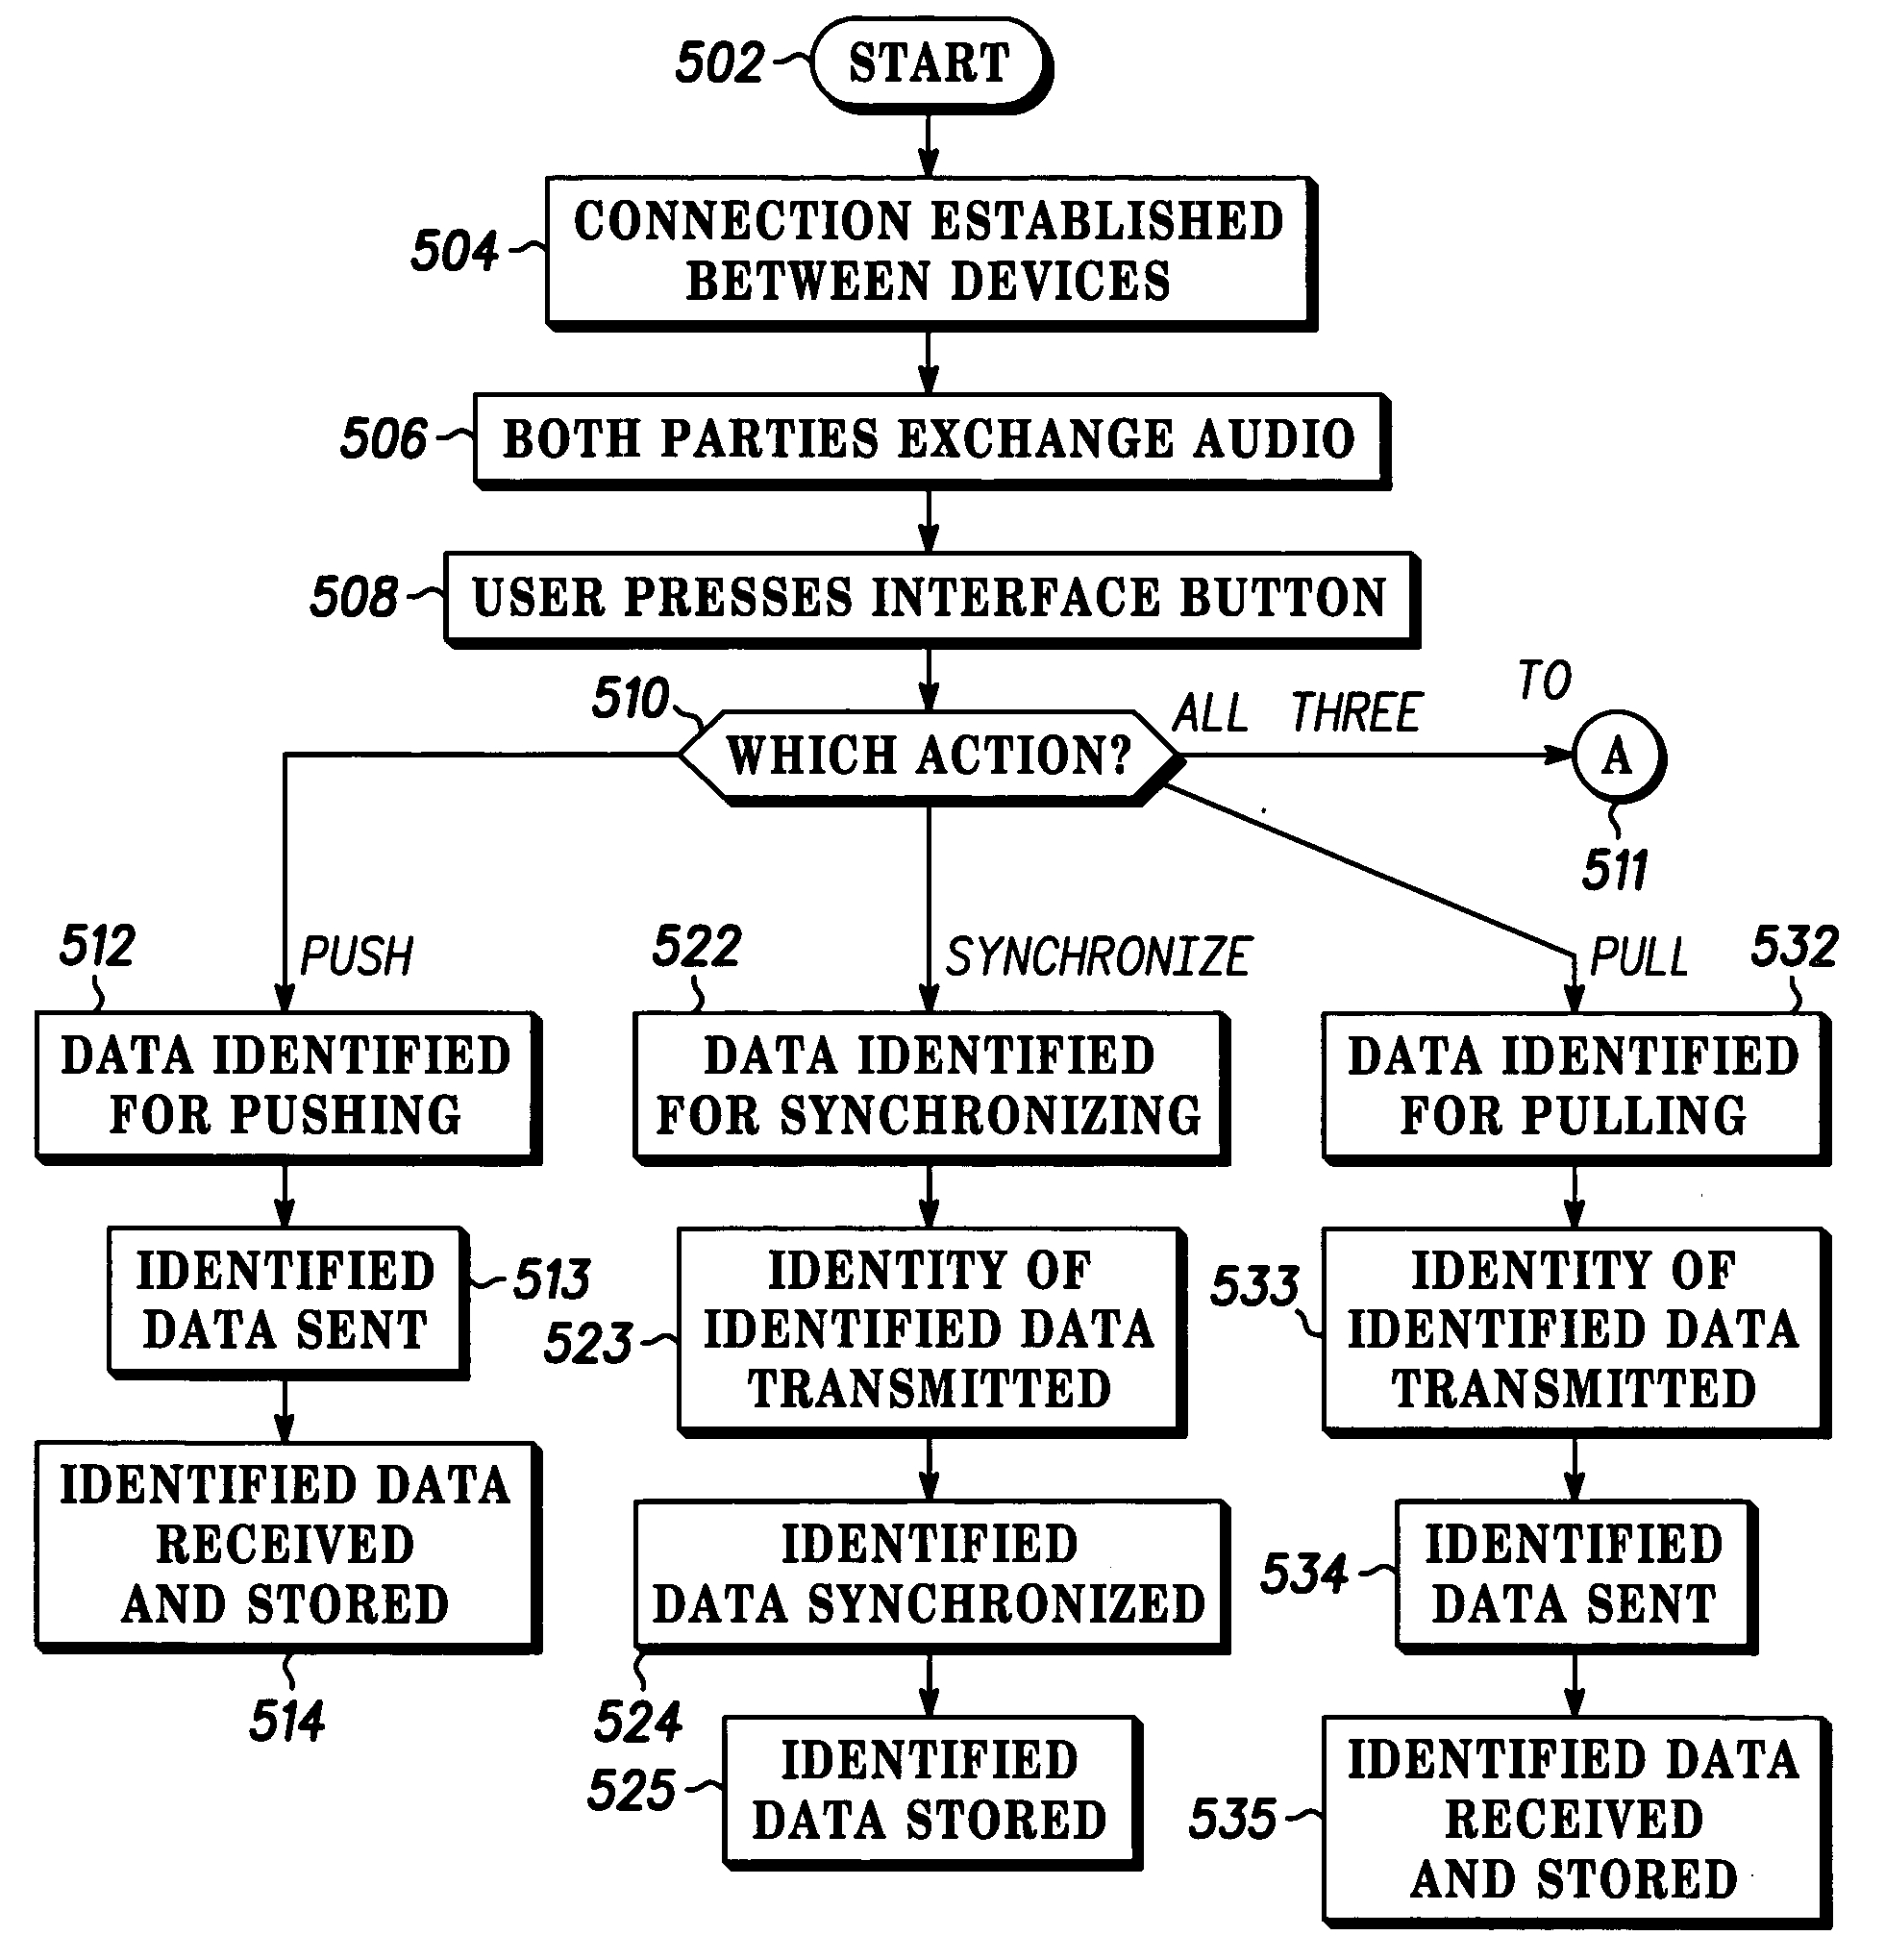 Simultaneous voice and data communication over a wireless network